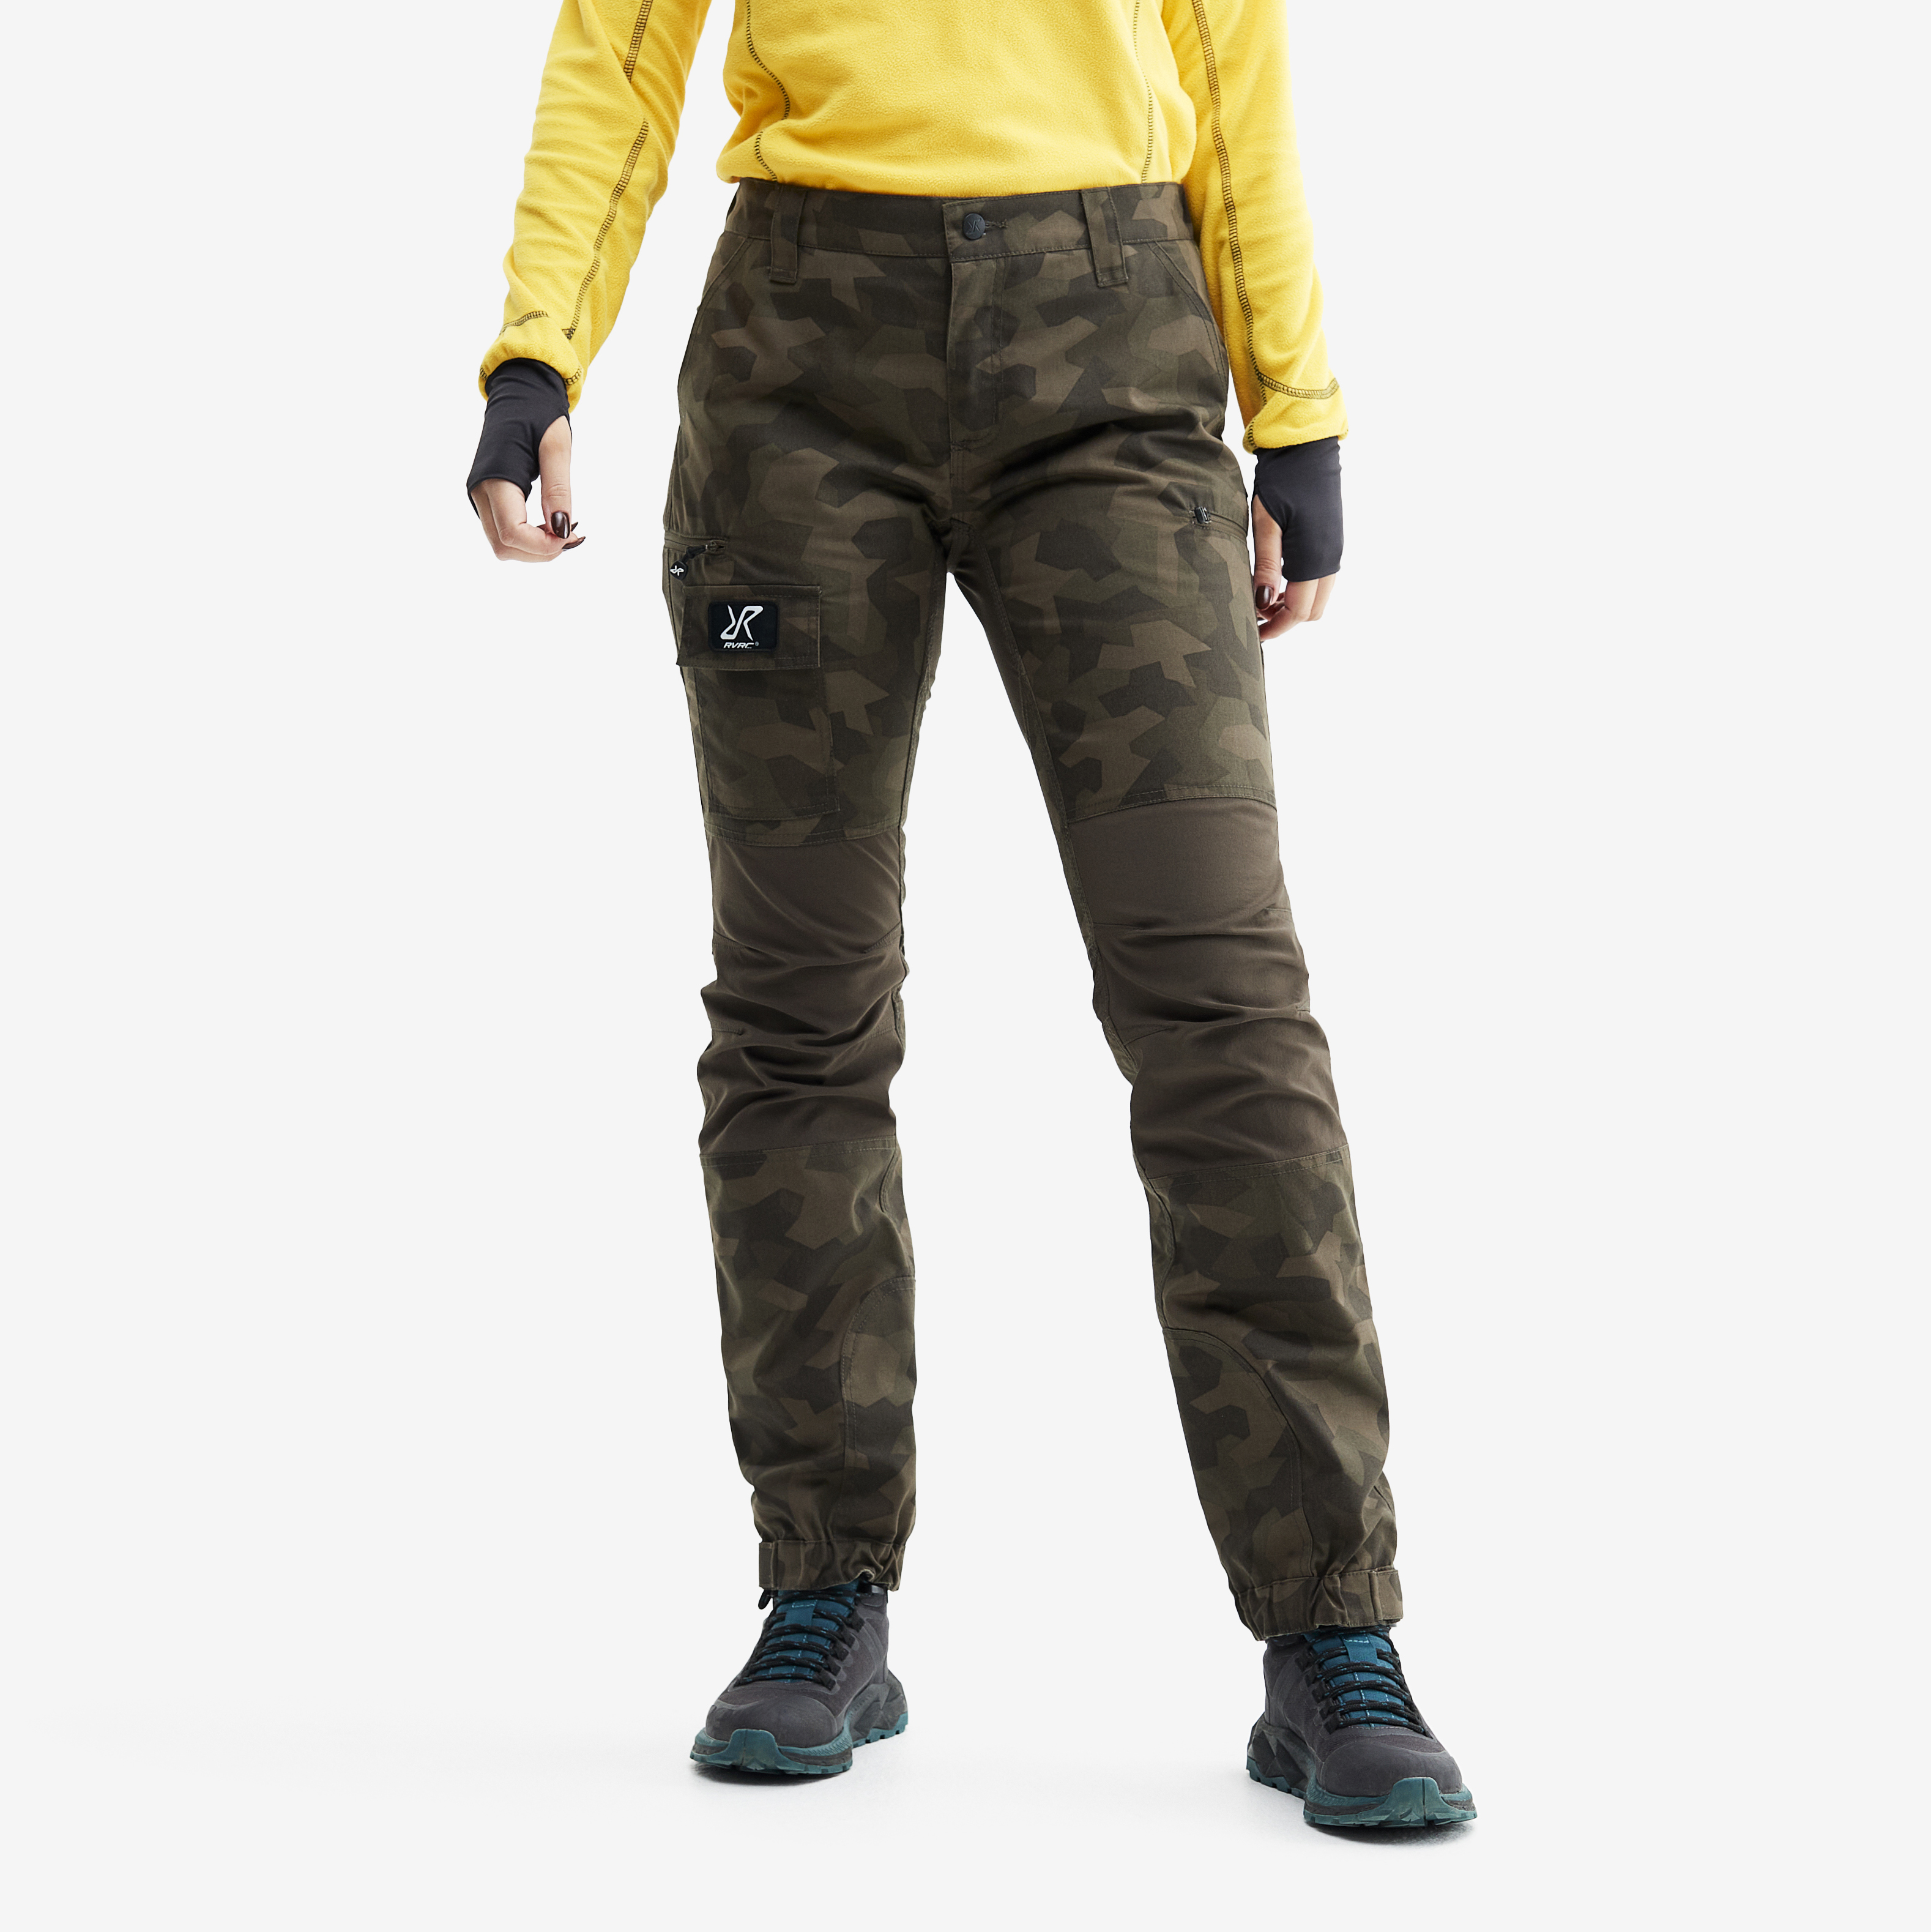 Nordwand outdoor pants for women in brown